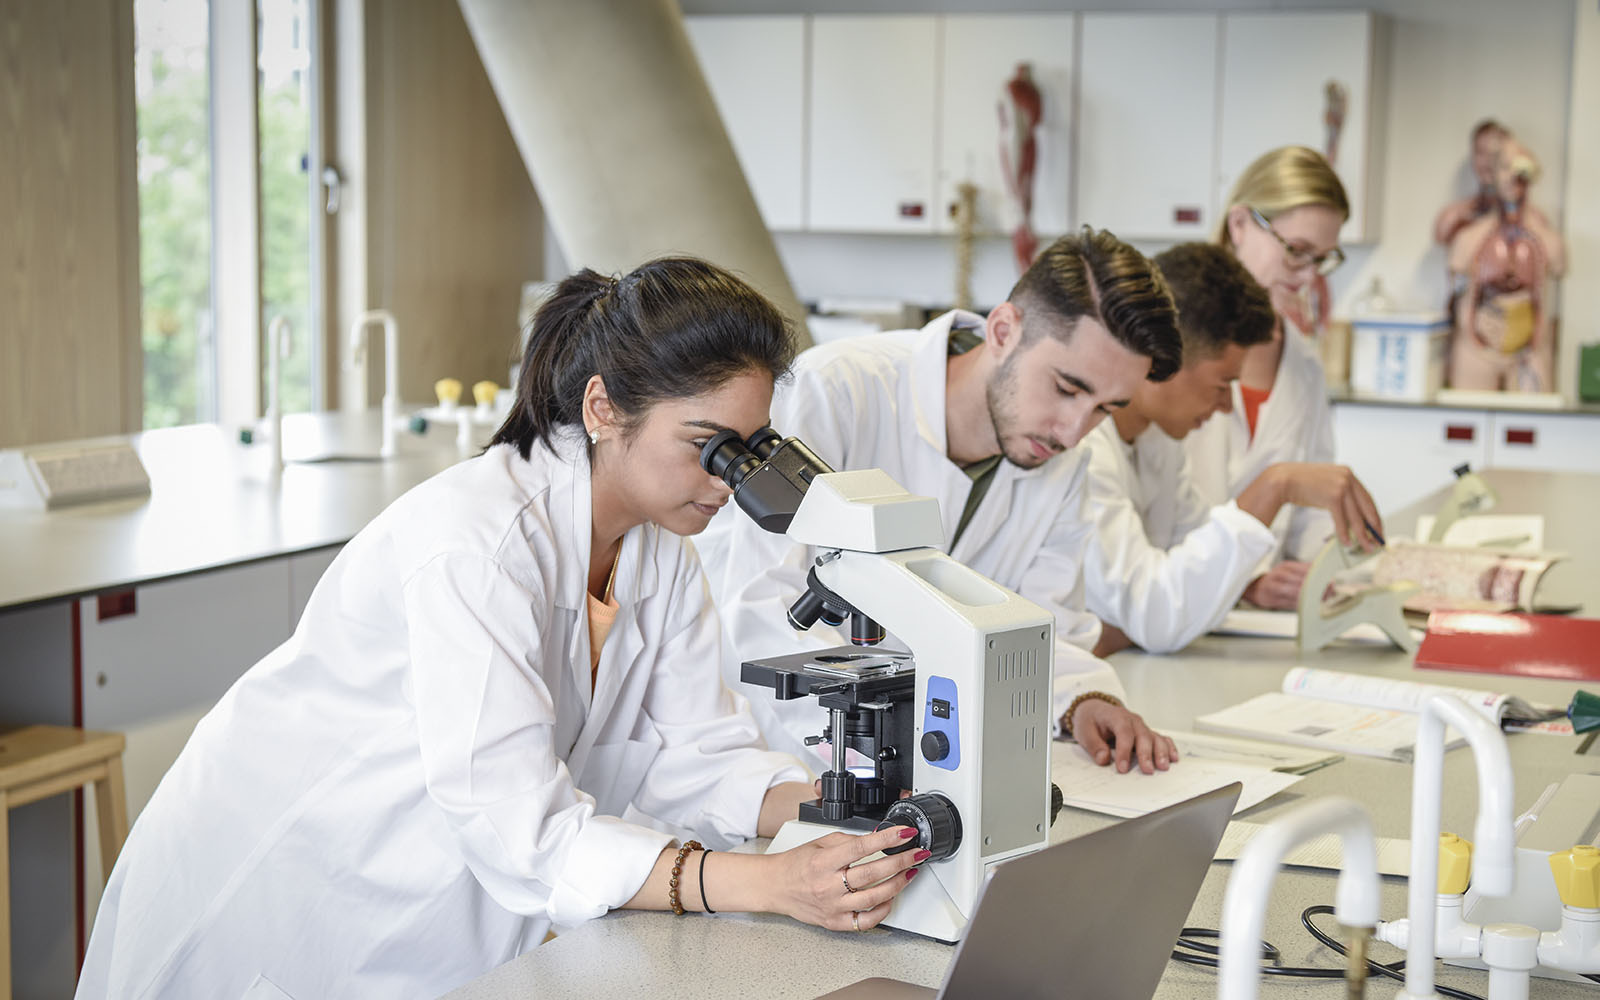 People in lab coats at a lab bench